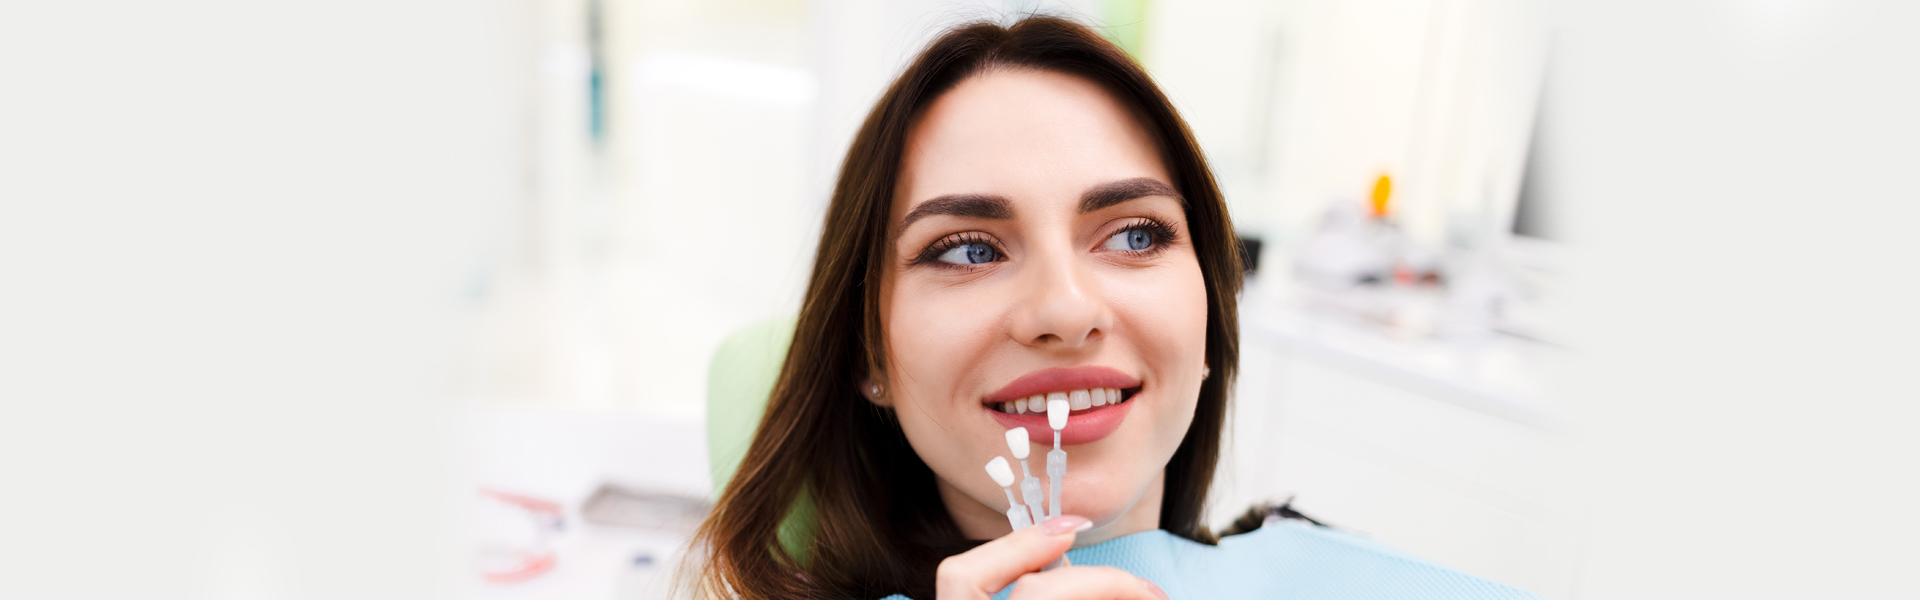 Dental Veneers: What to Expect Before, During, and After